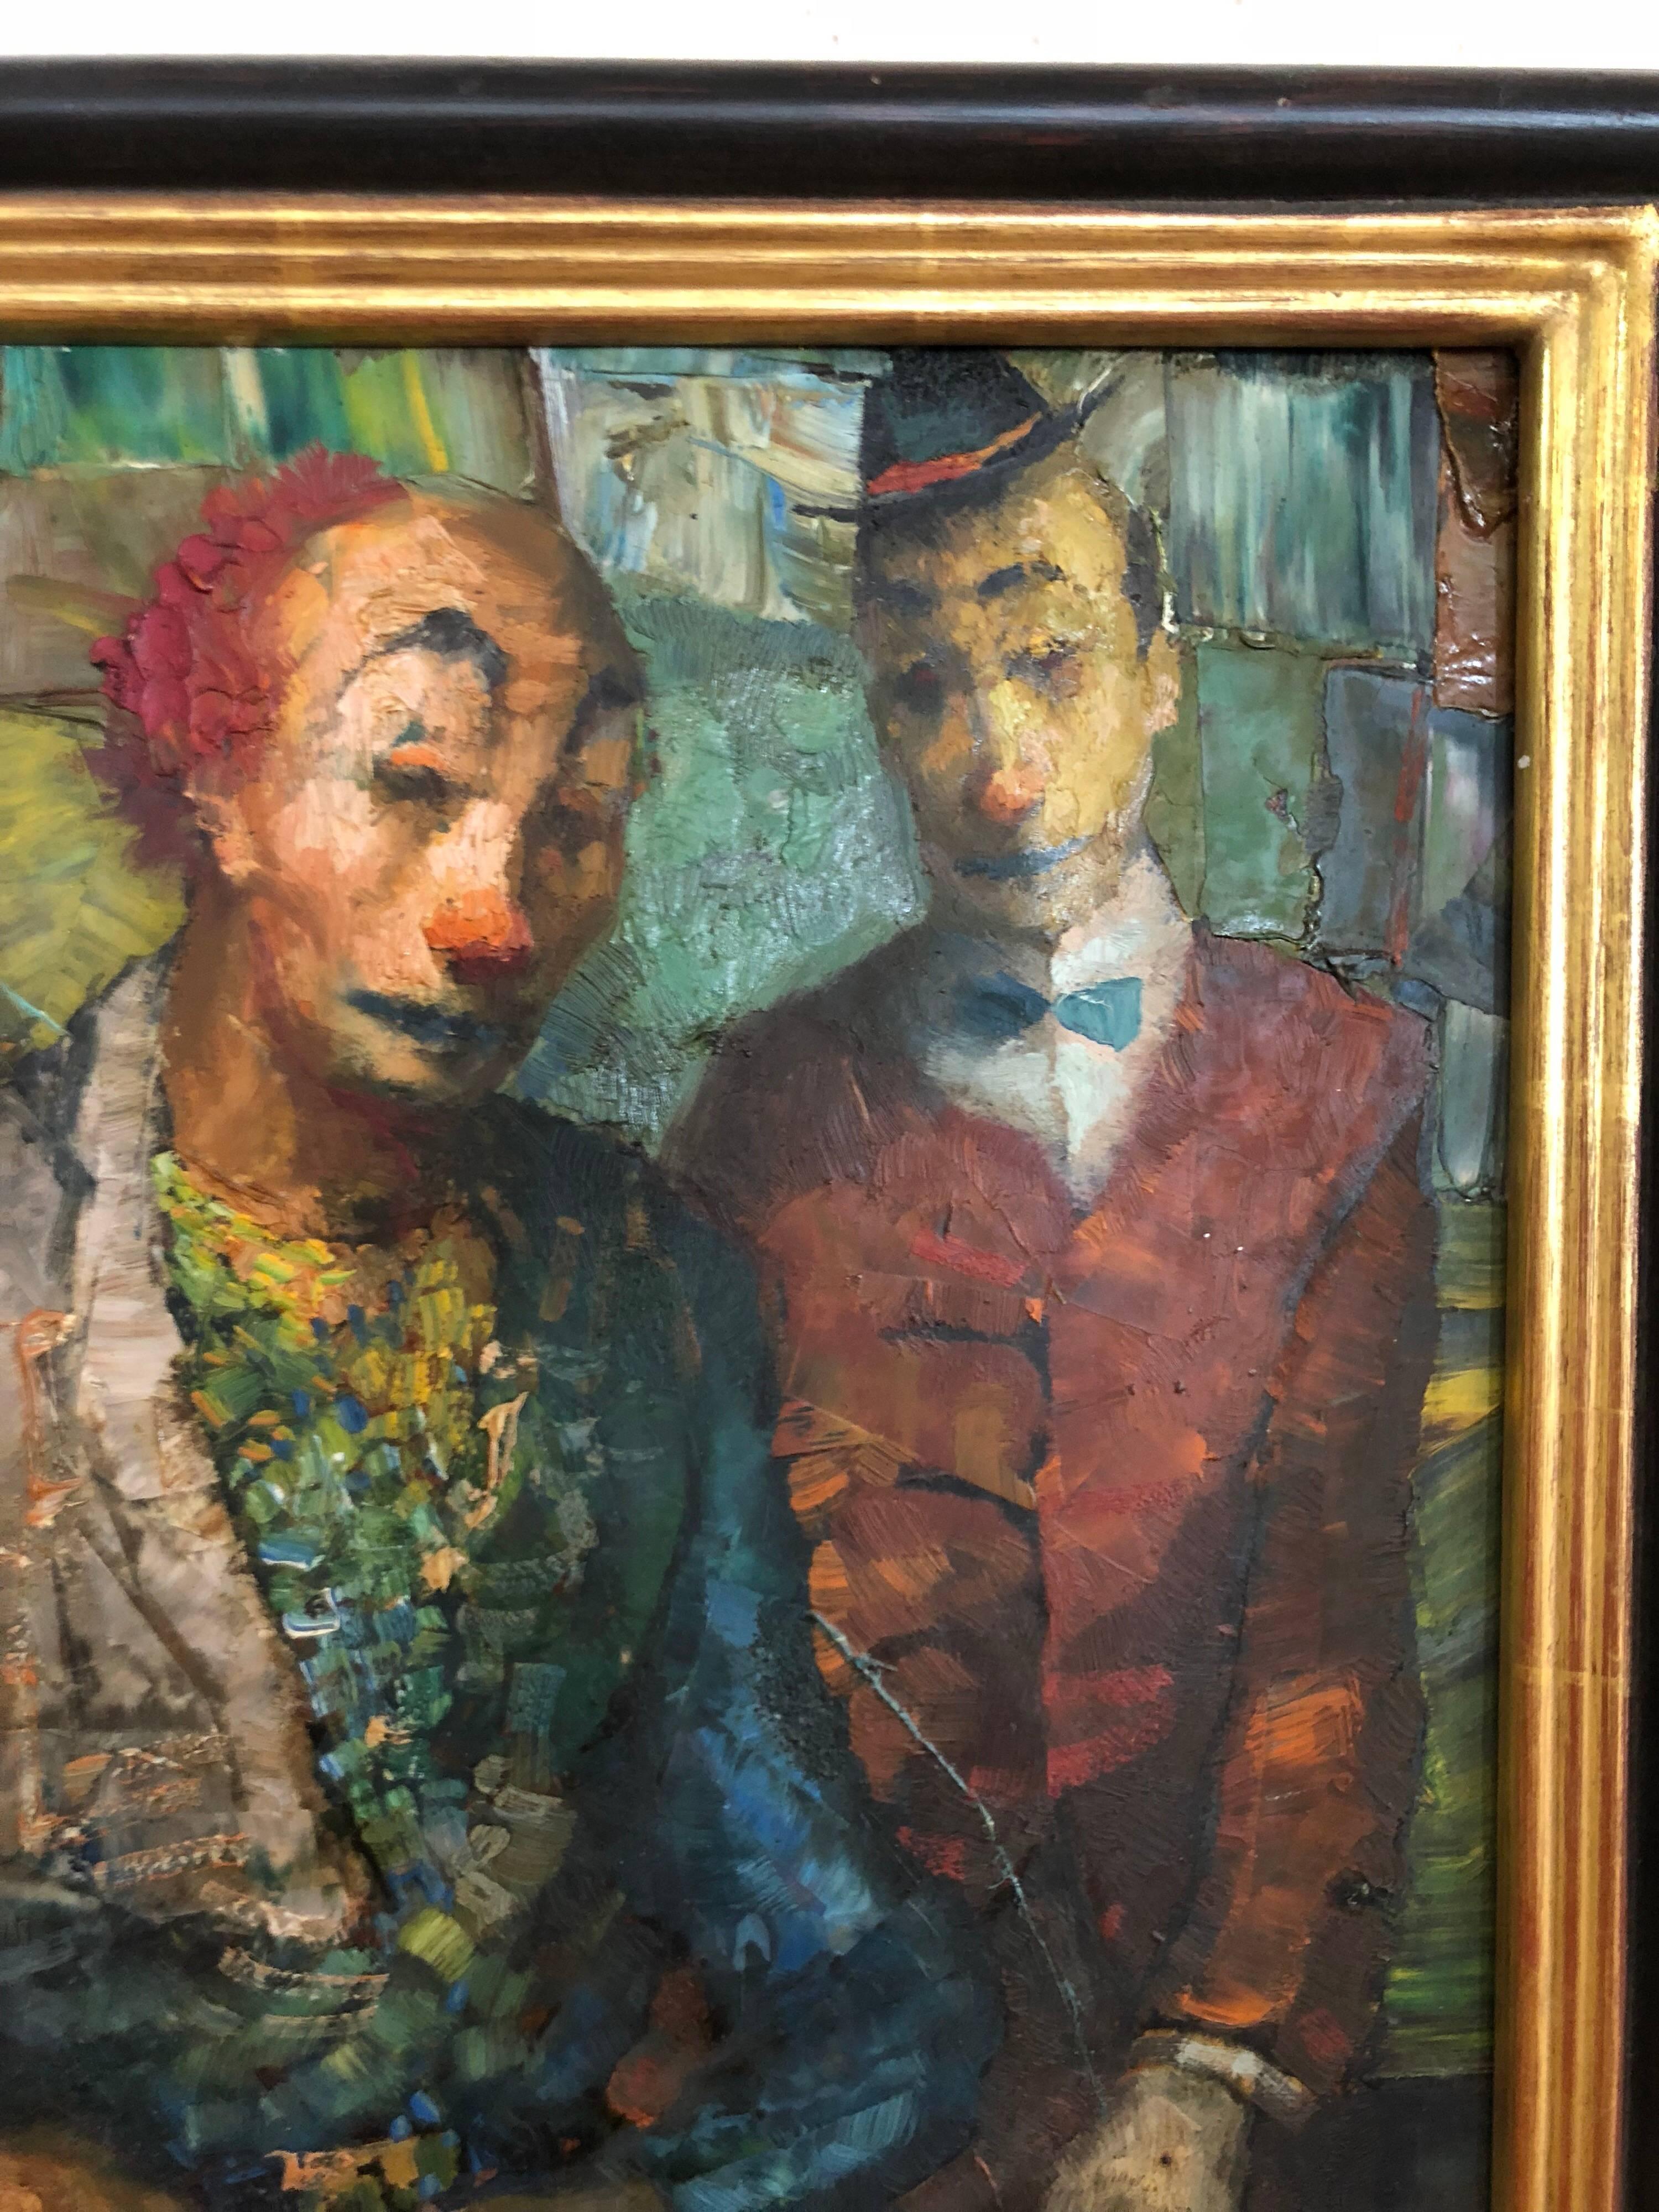 Signed Mid-century painting of clowns by listed American artist George Russin. (1910-2010) Nice , heavy impasto oil on board with palette knife technique. Incredible attention to detail. Highly skilled artist with great auction records. Great